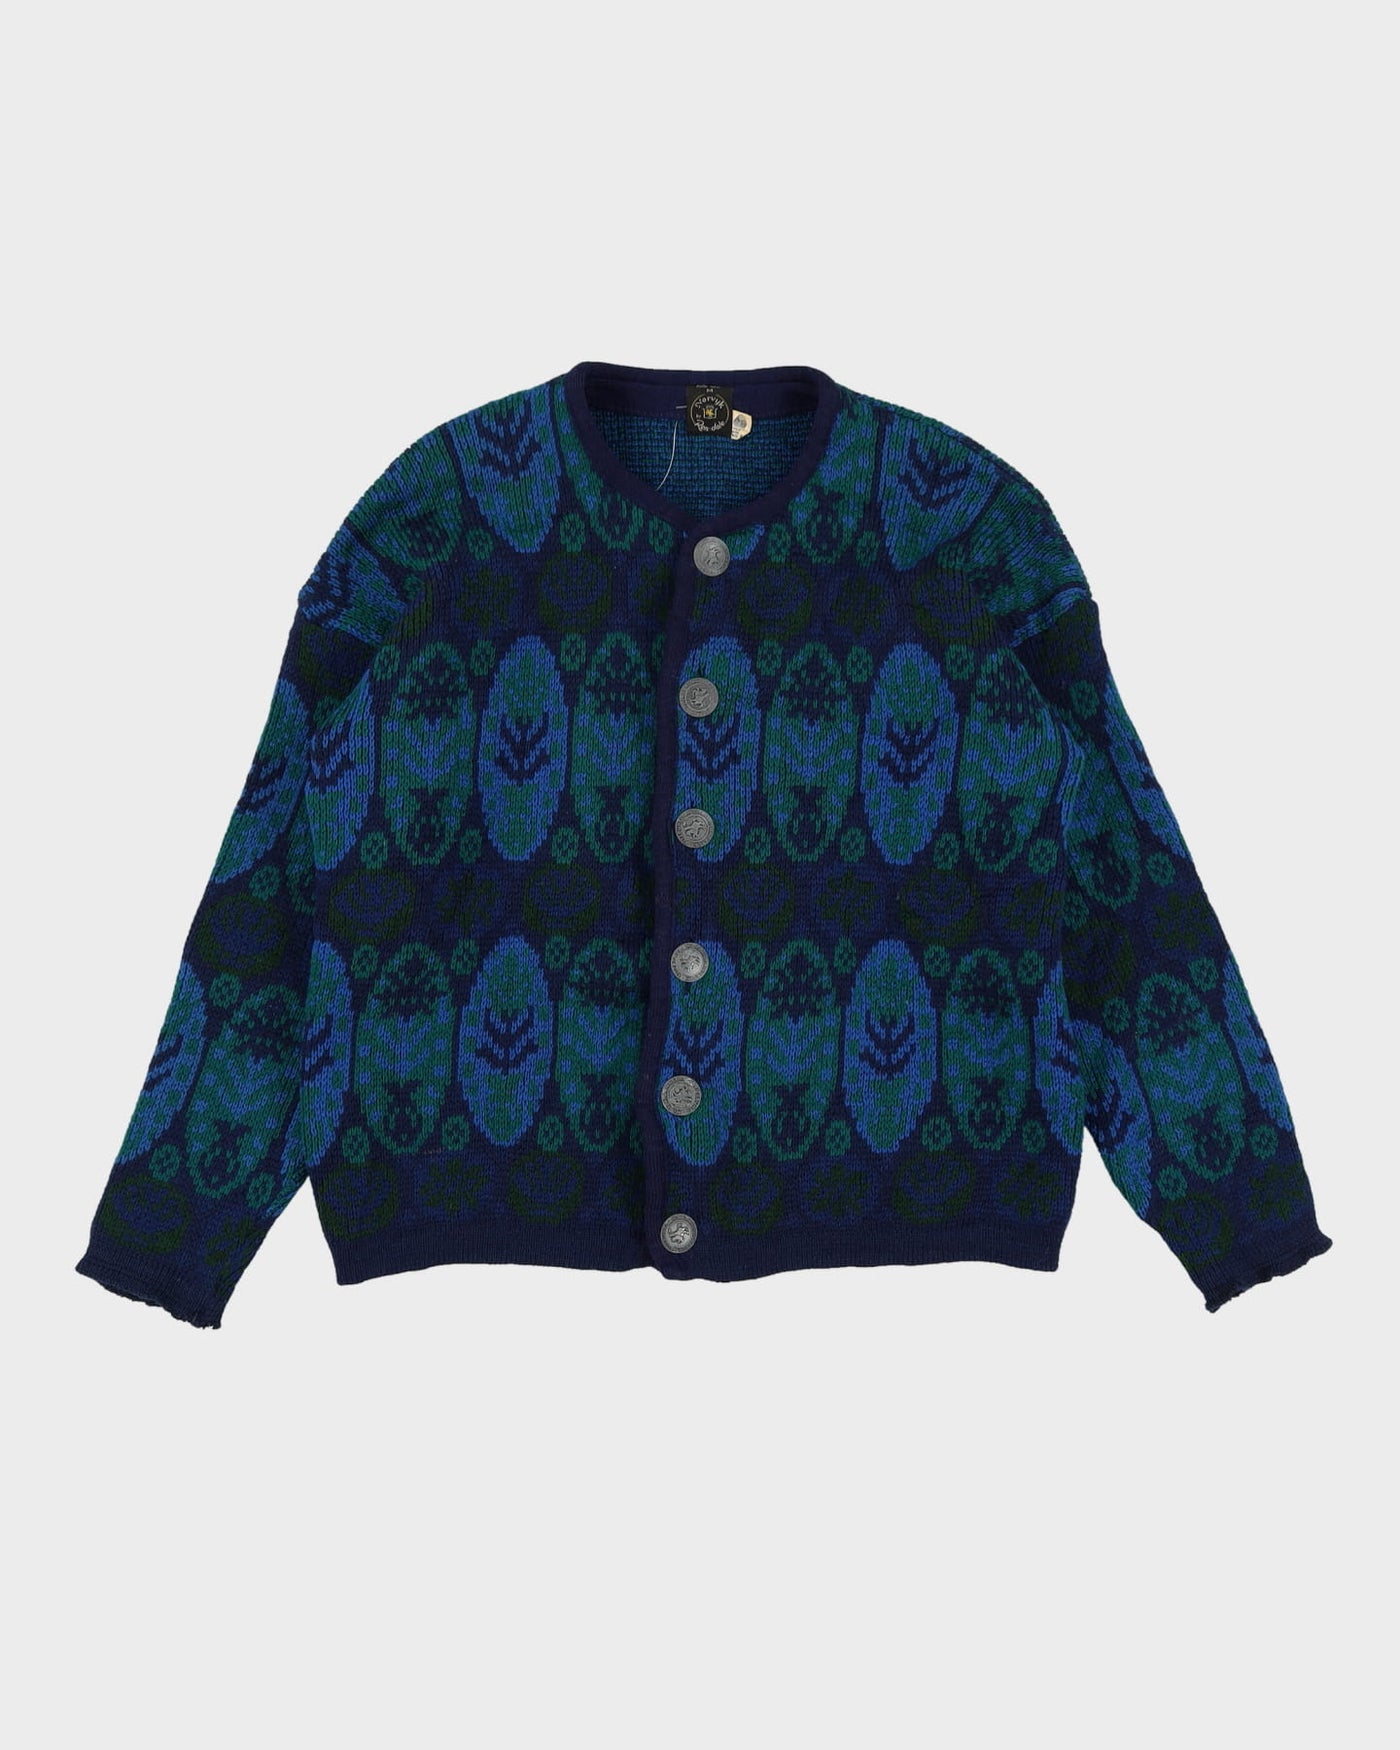 1970s Norvyk Blue Patterned Knitted Cardigan - L